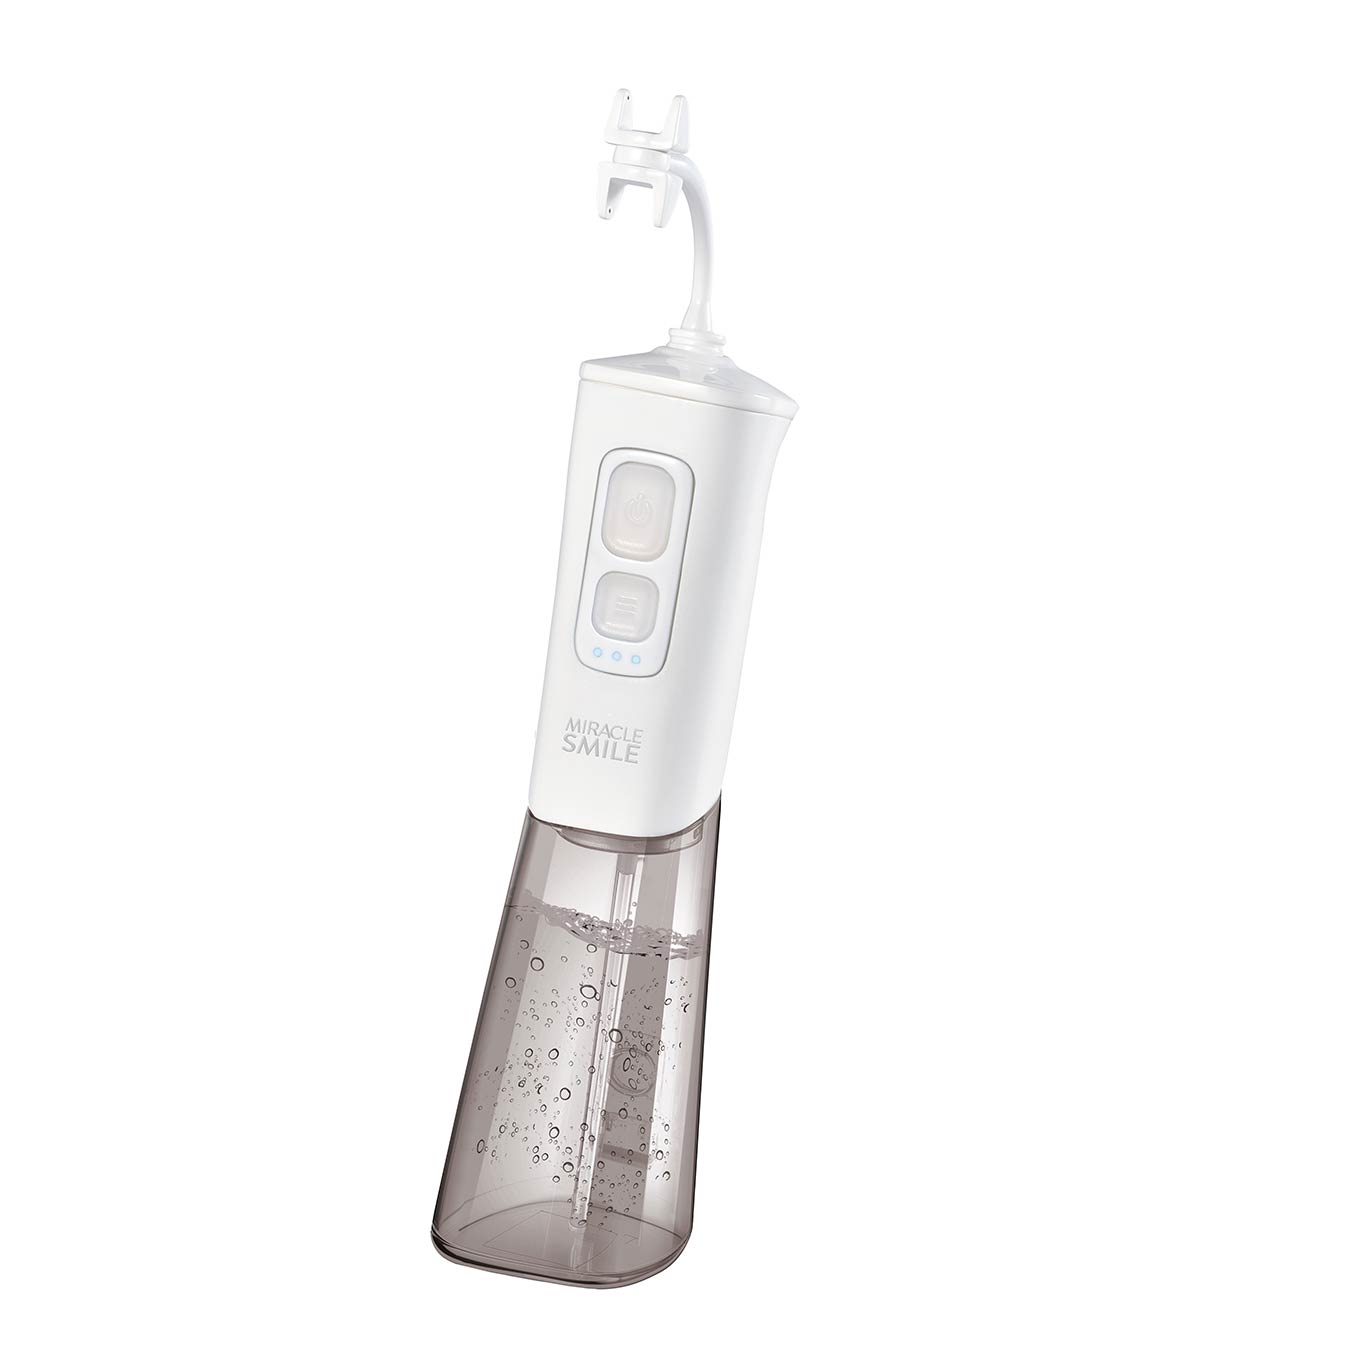 An image of Miracle Smile Cordless Water Flosser